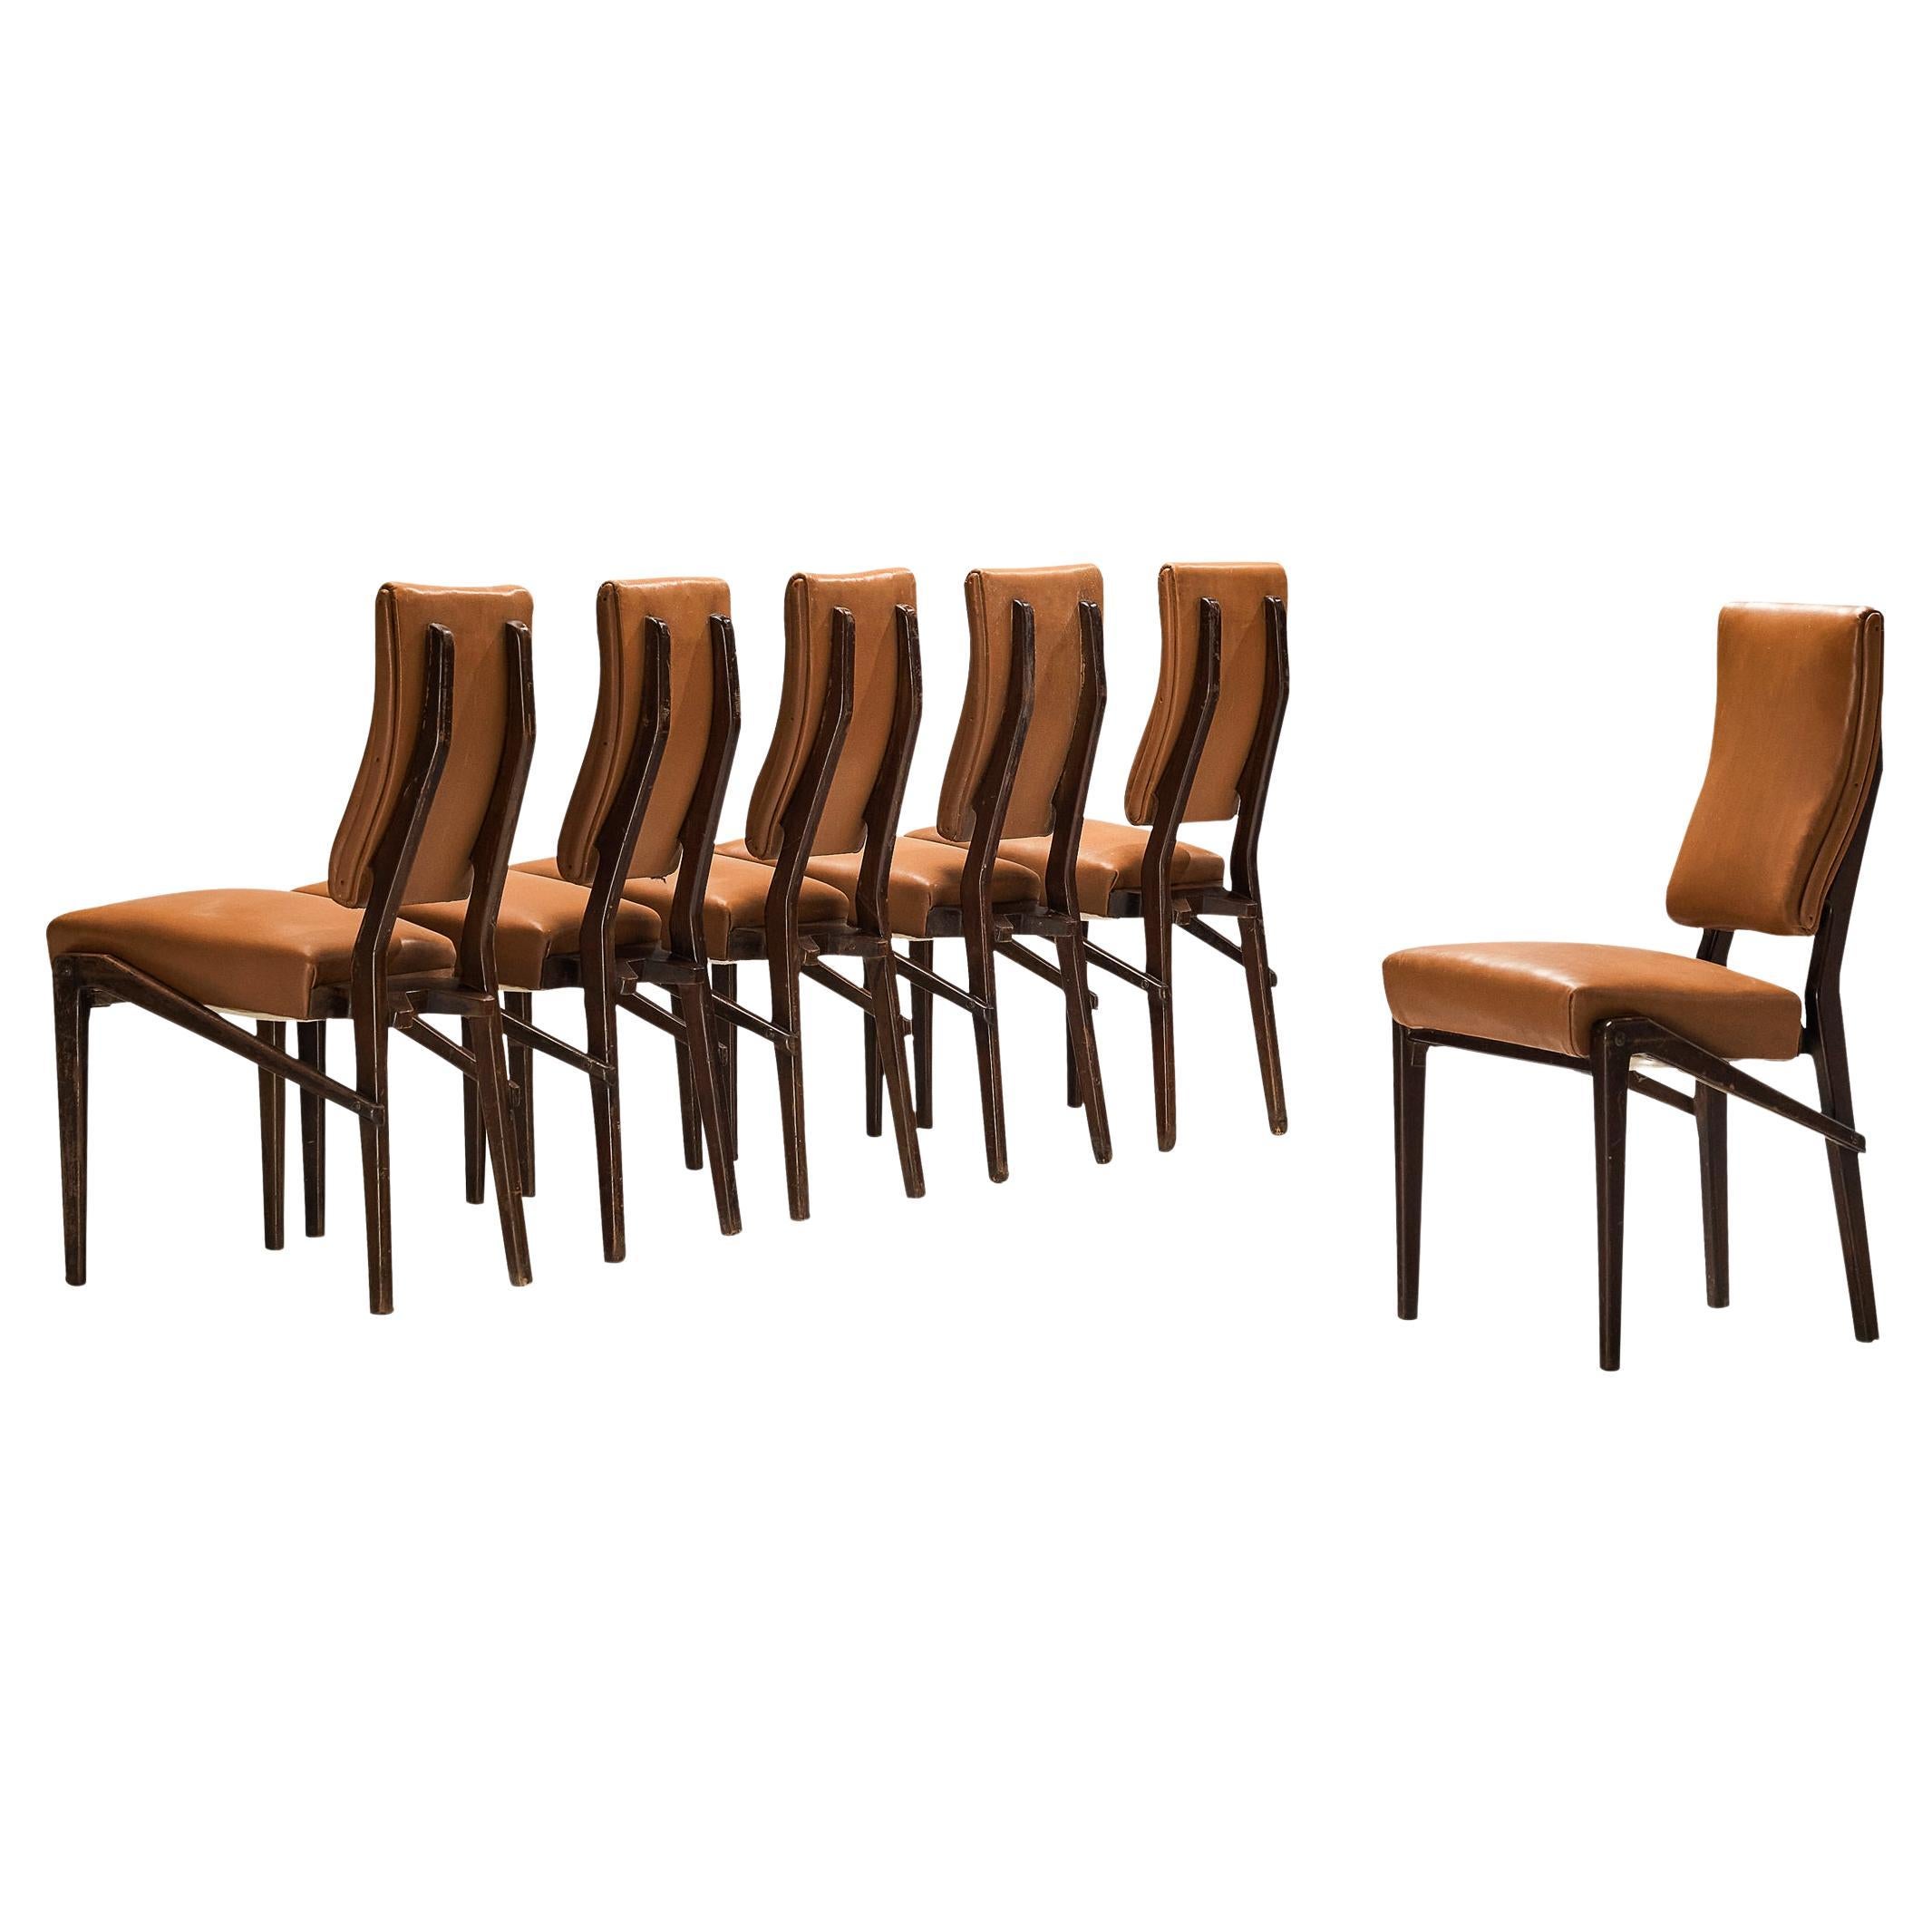 Unique Mario Oreglia Set of Six Dining Chairs with Sculptural Wooden Frame 